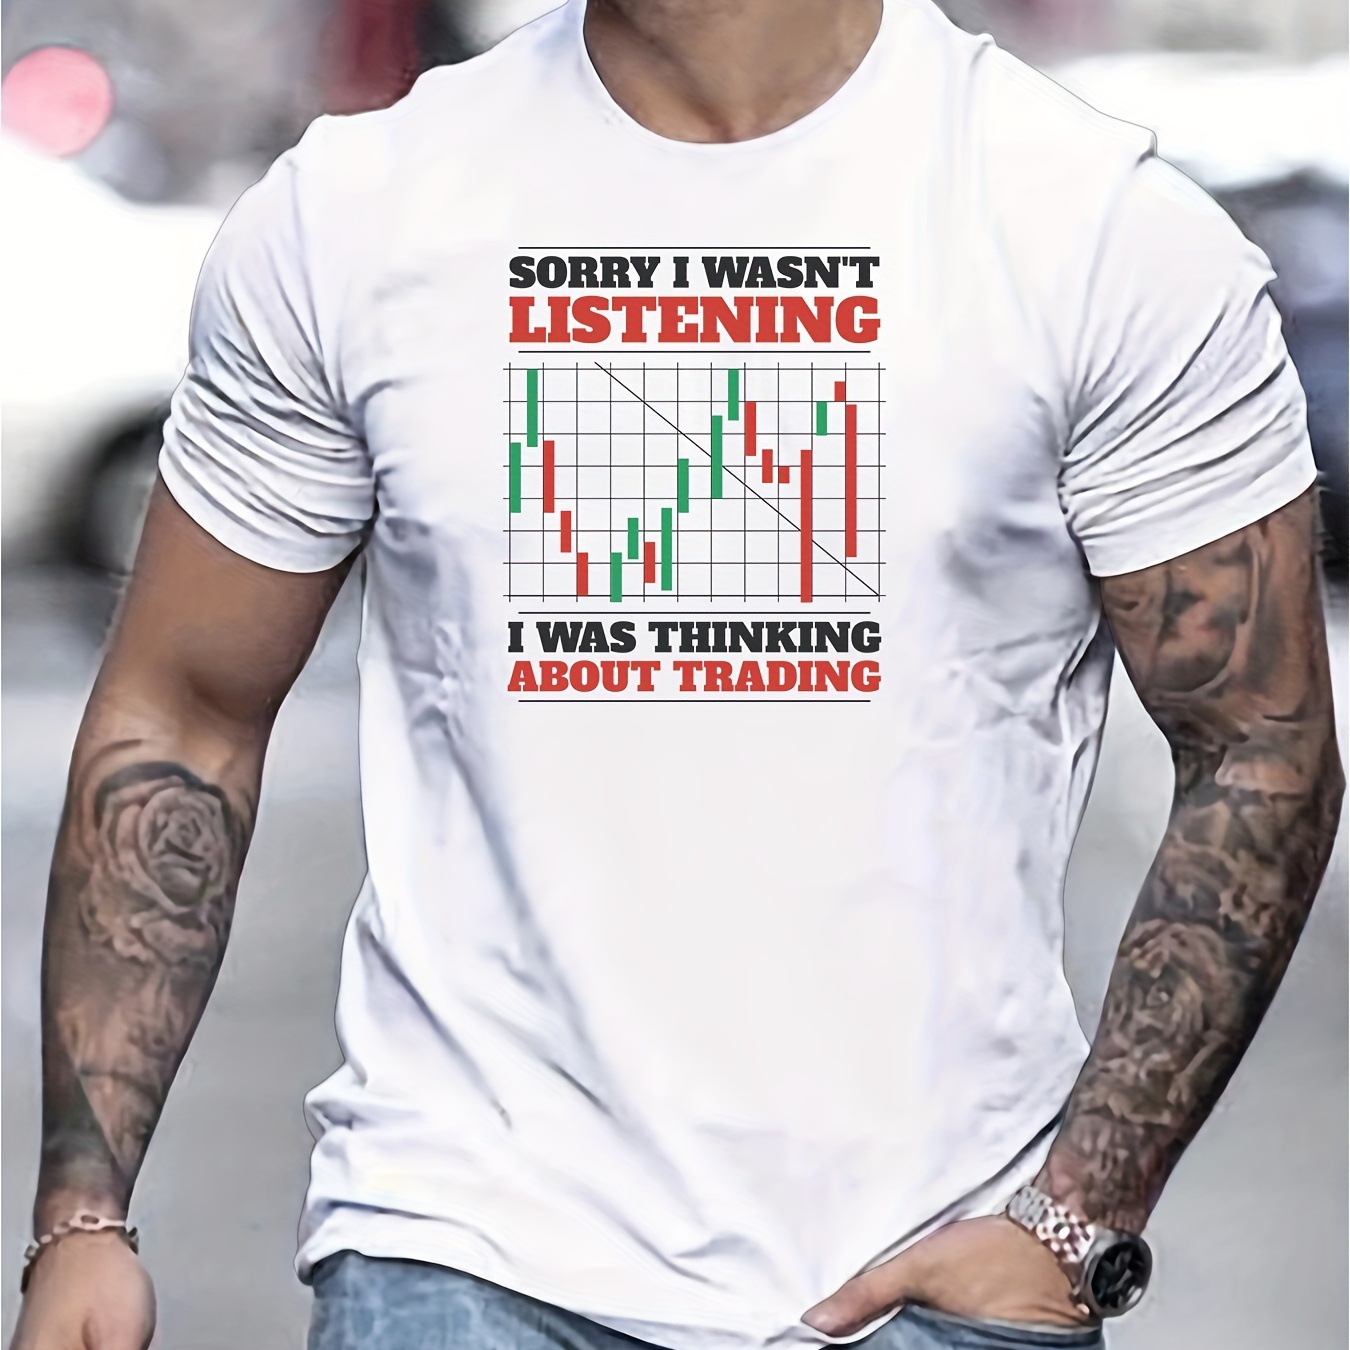 

Think About Trading Print Tee Shirt, Tees For Men, Casual Short Sleeve T-shirt For Summer